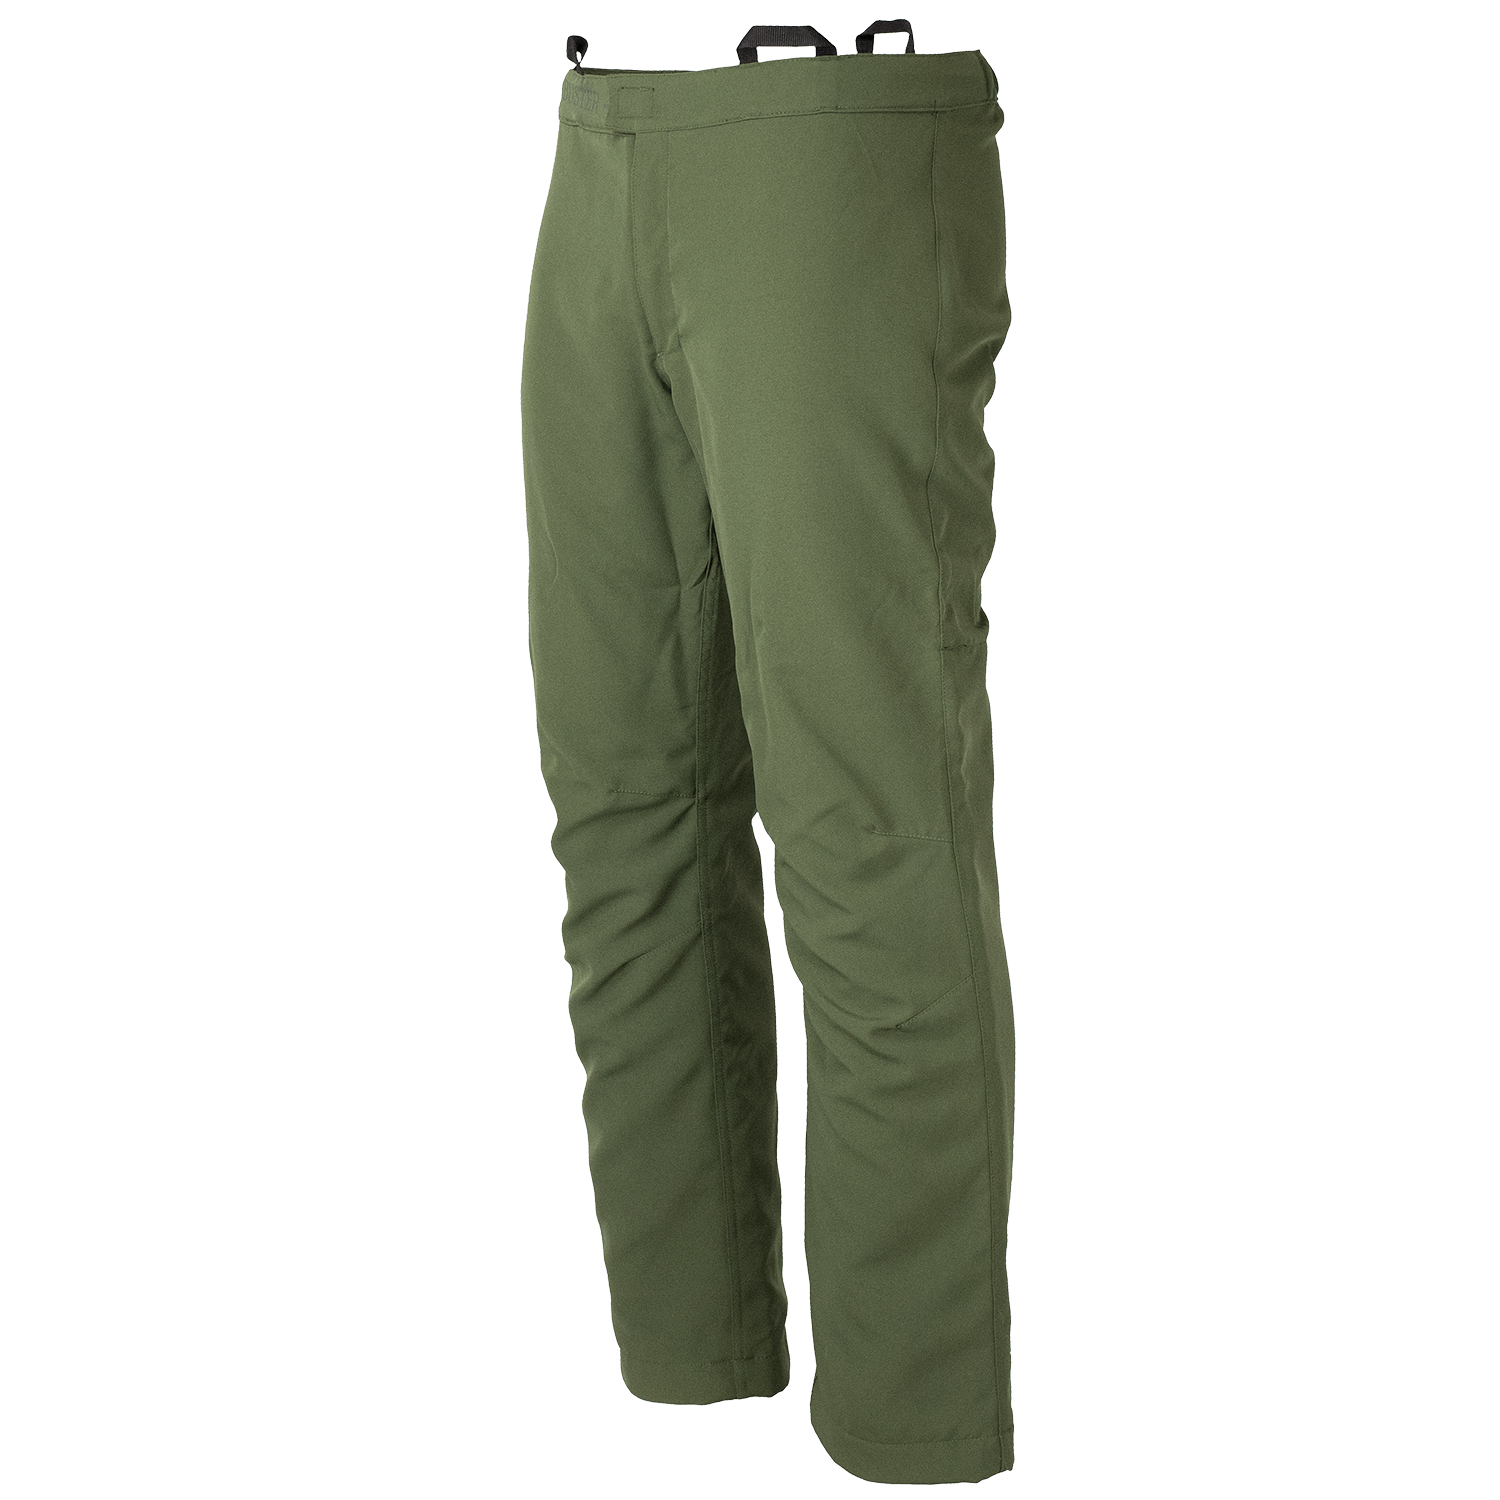 Pirscher Gear Boarbuster Protective Underpants - Blood Trailing